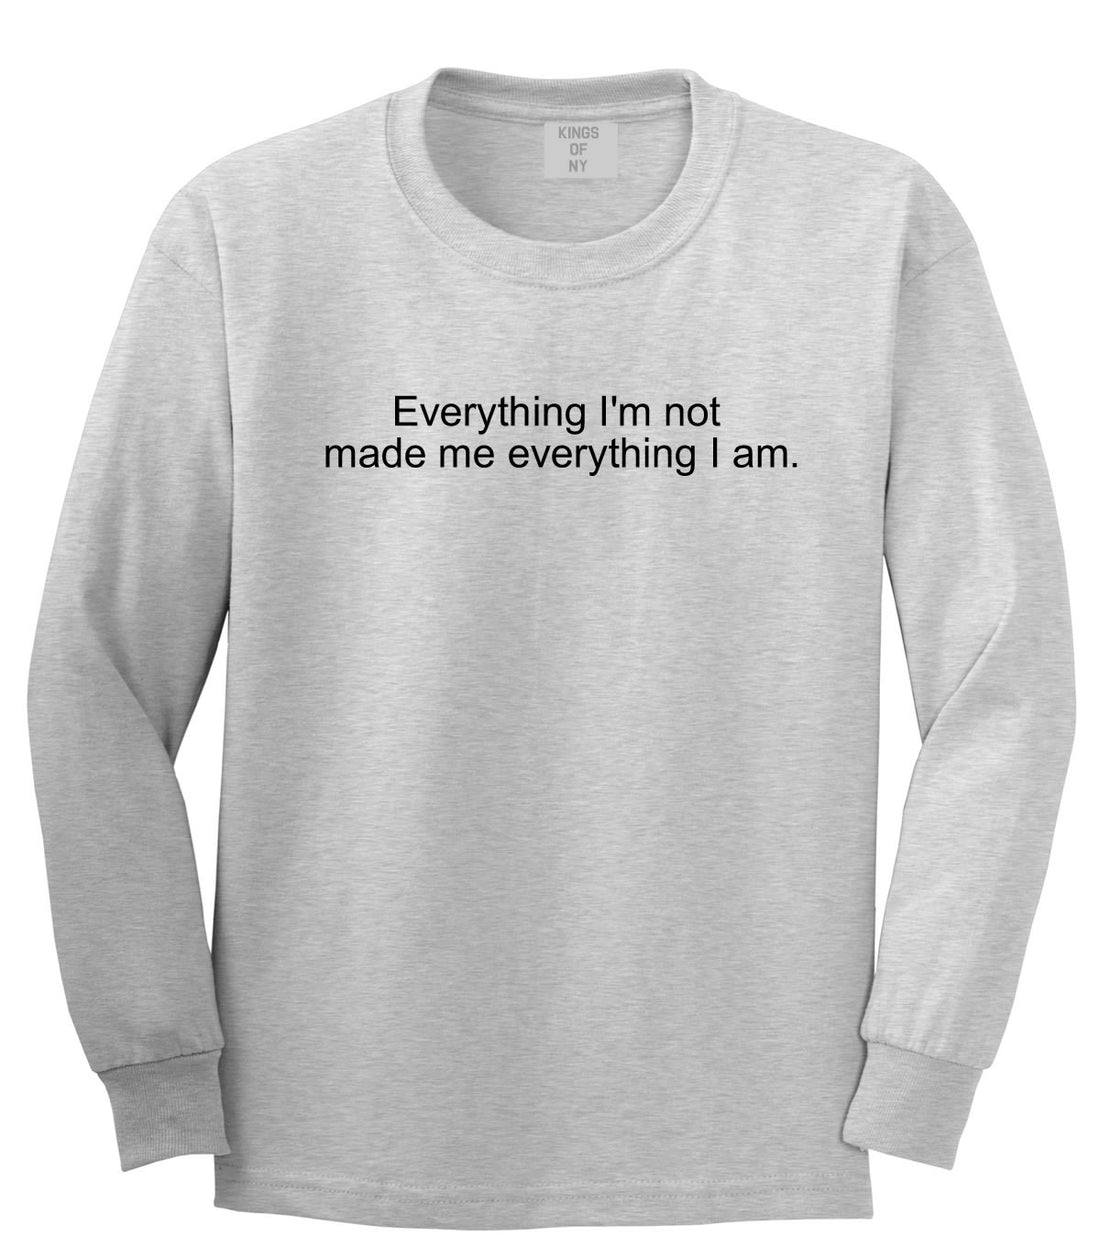 Everything Im Not Made Me Everything I am Long Sleeve T-Shirt in Grey By Kings Of NY